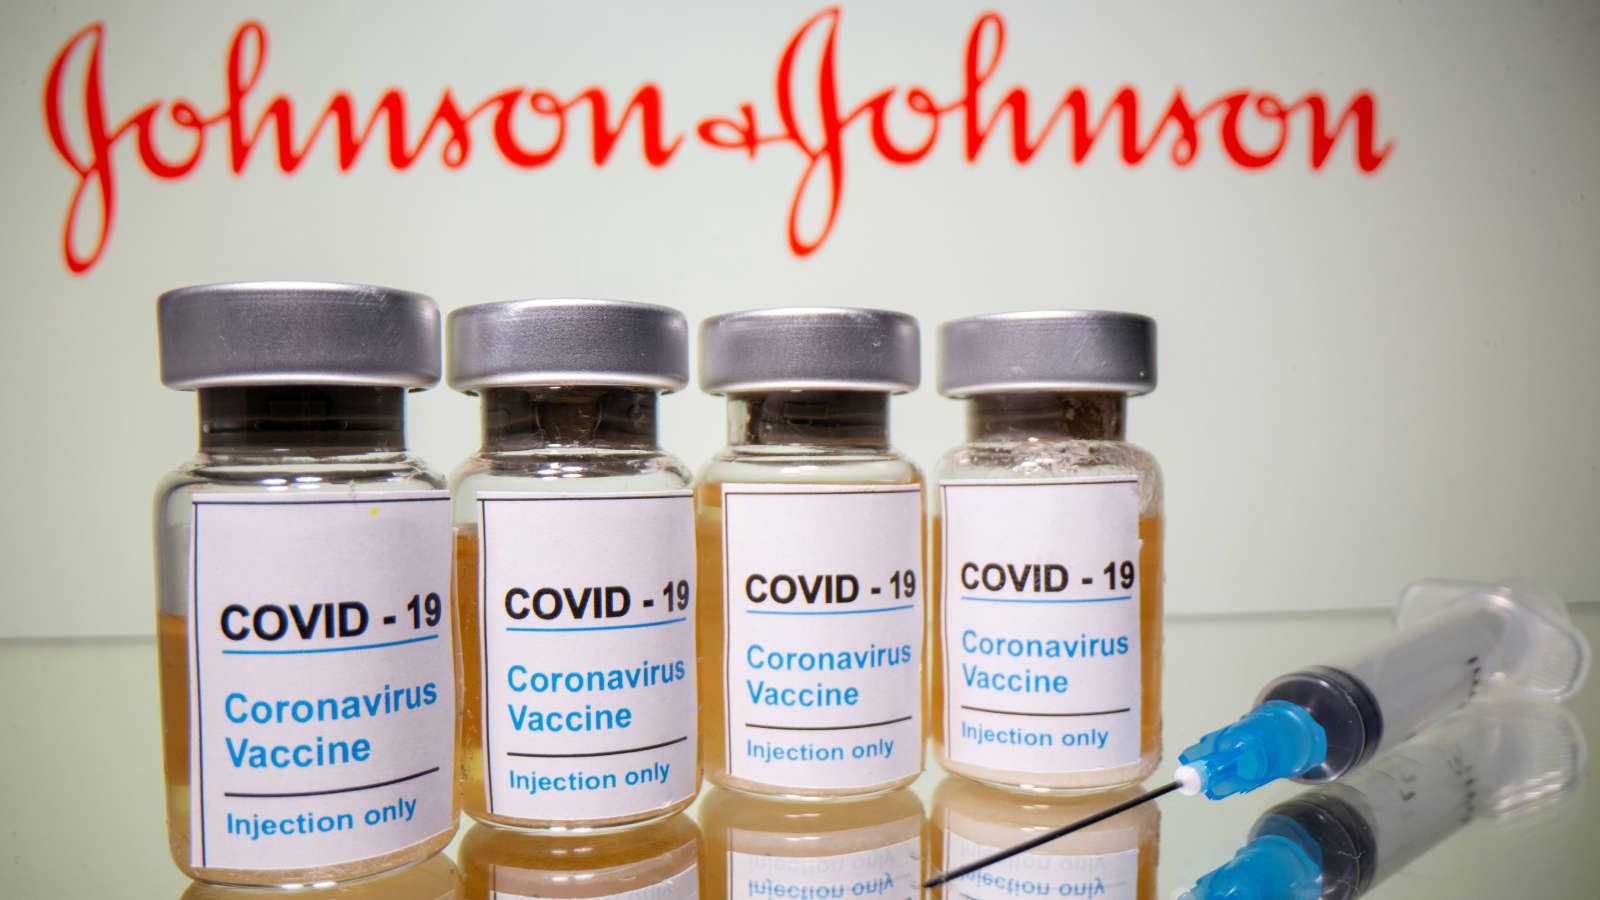 The US medical regulator recommended limiting the use of the JJ vaccine against COVID-19